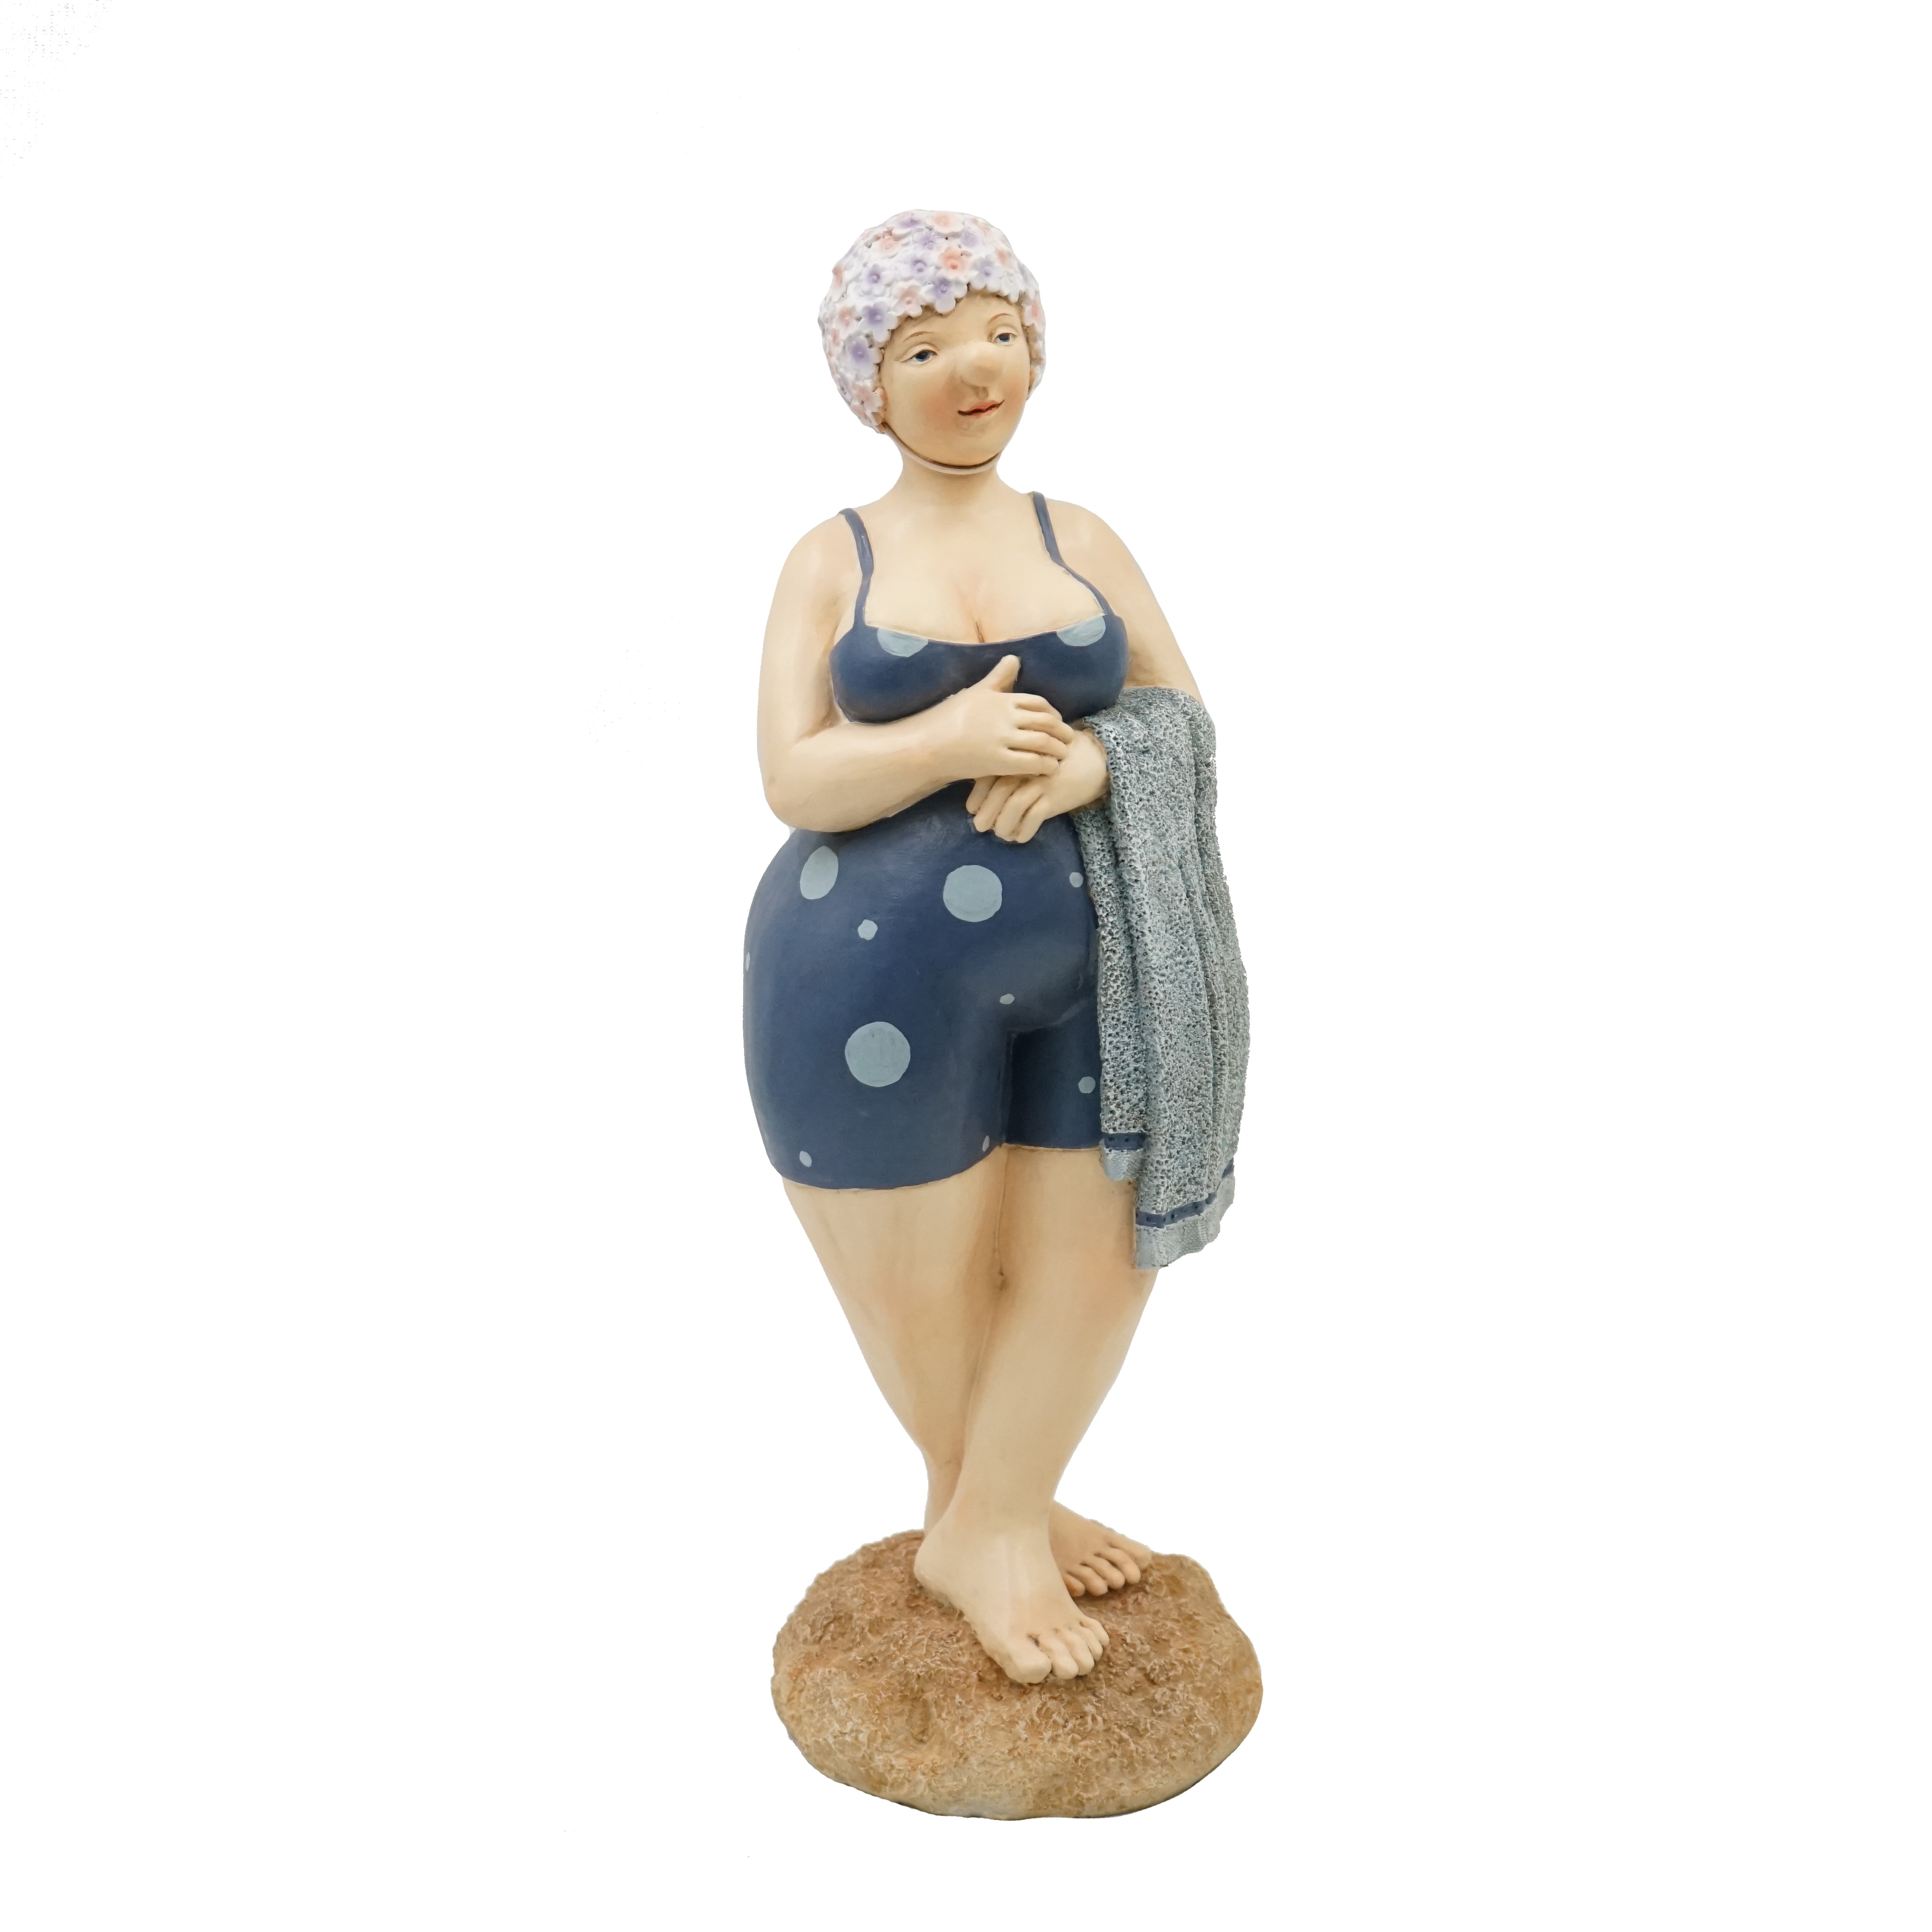 Resin Funny Garden Figurine Swimsuited Lady Statue